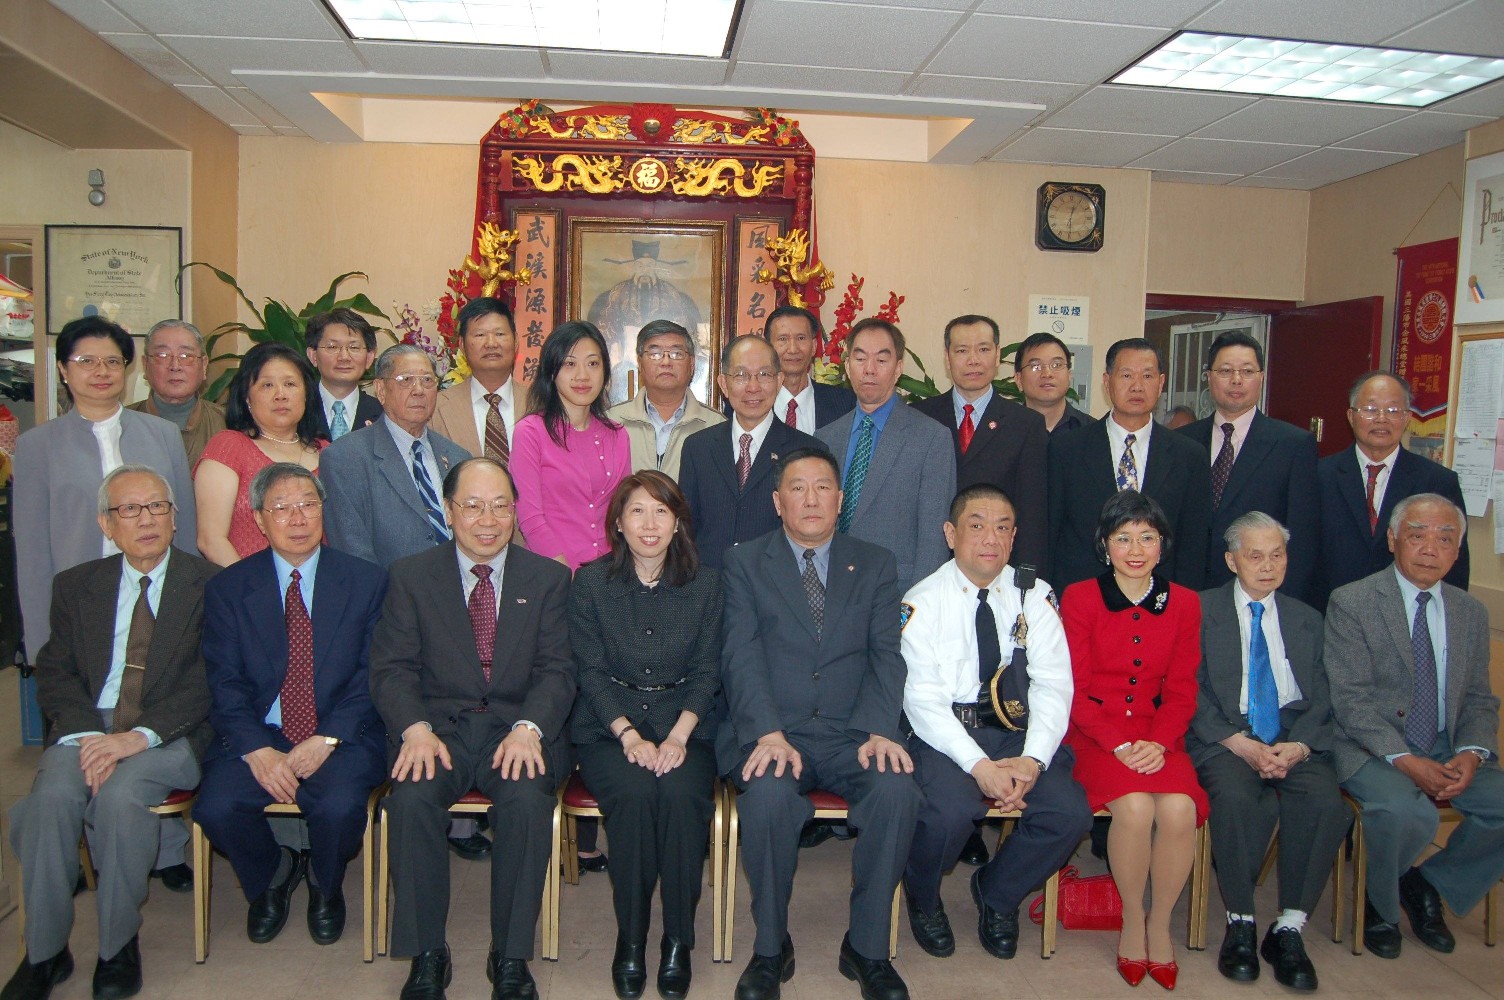 Lai Sun's guests with YFT officers